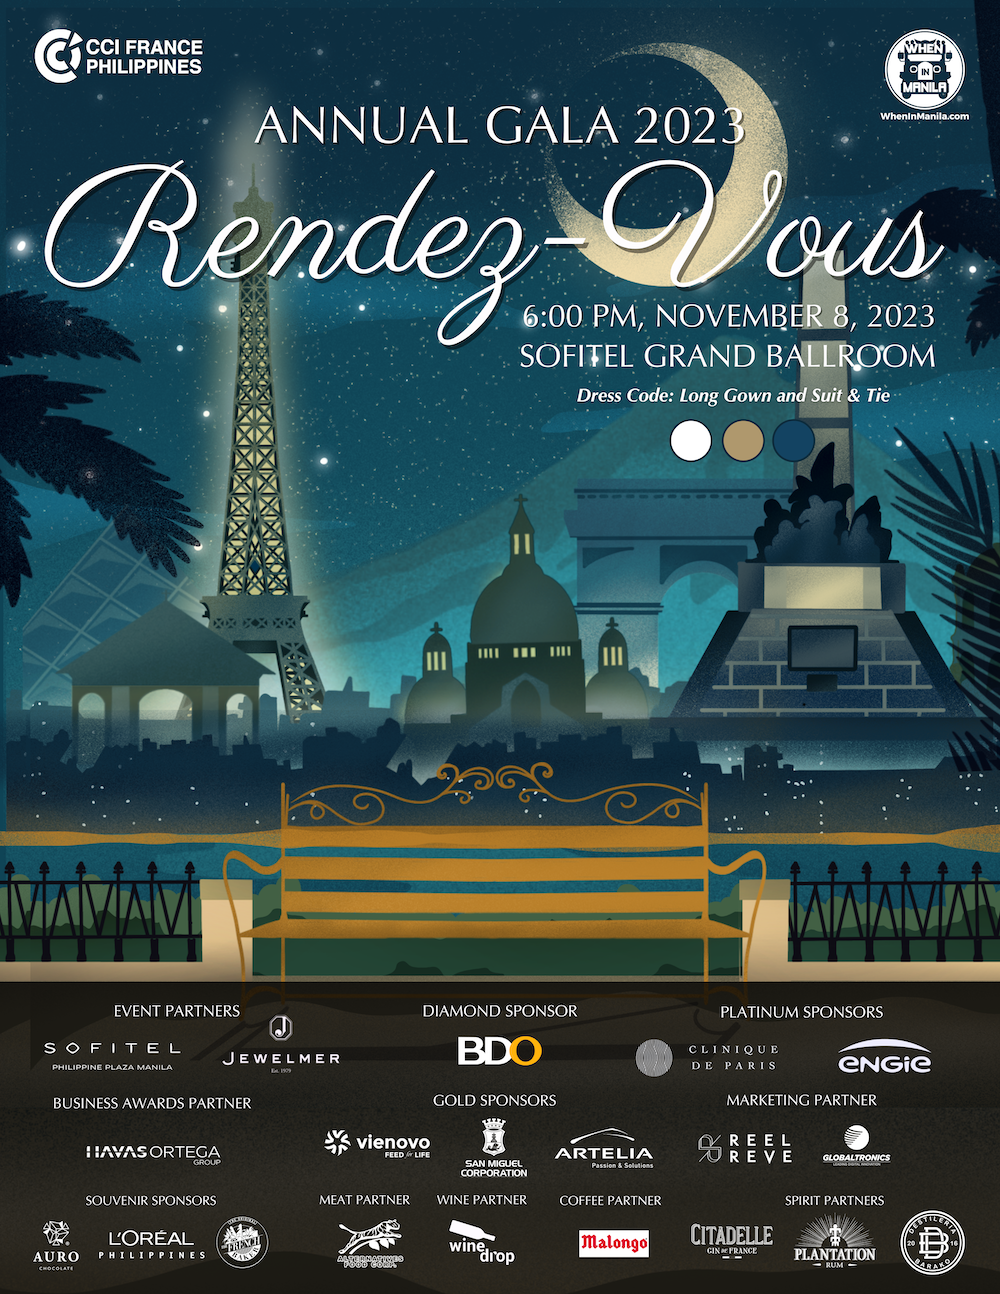 The French Chamber of Commerce and Industry in the Philippines | This Annual Gala Celebrates France-Philippines Alliance with Friendship, Culture, and Excellence 